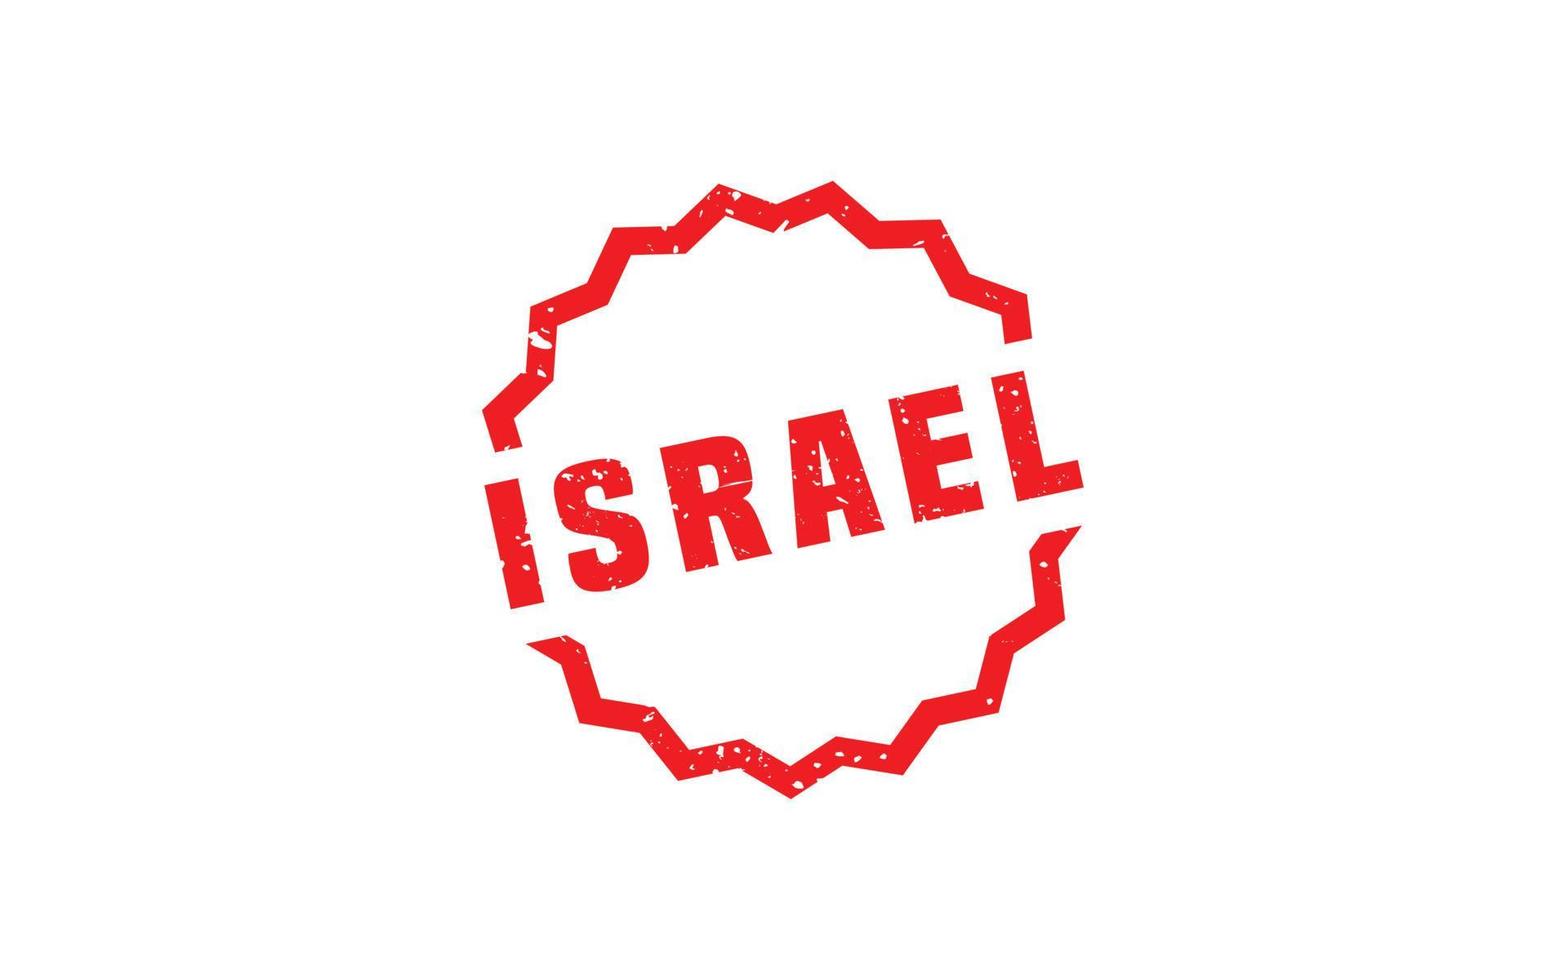 ISRAEL stamp rubber with grunge style on white background vector